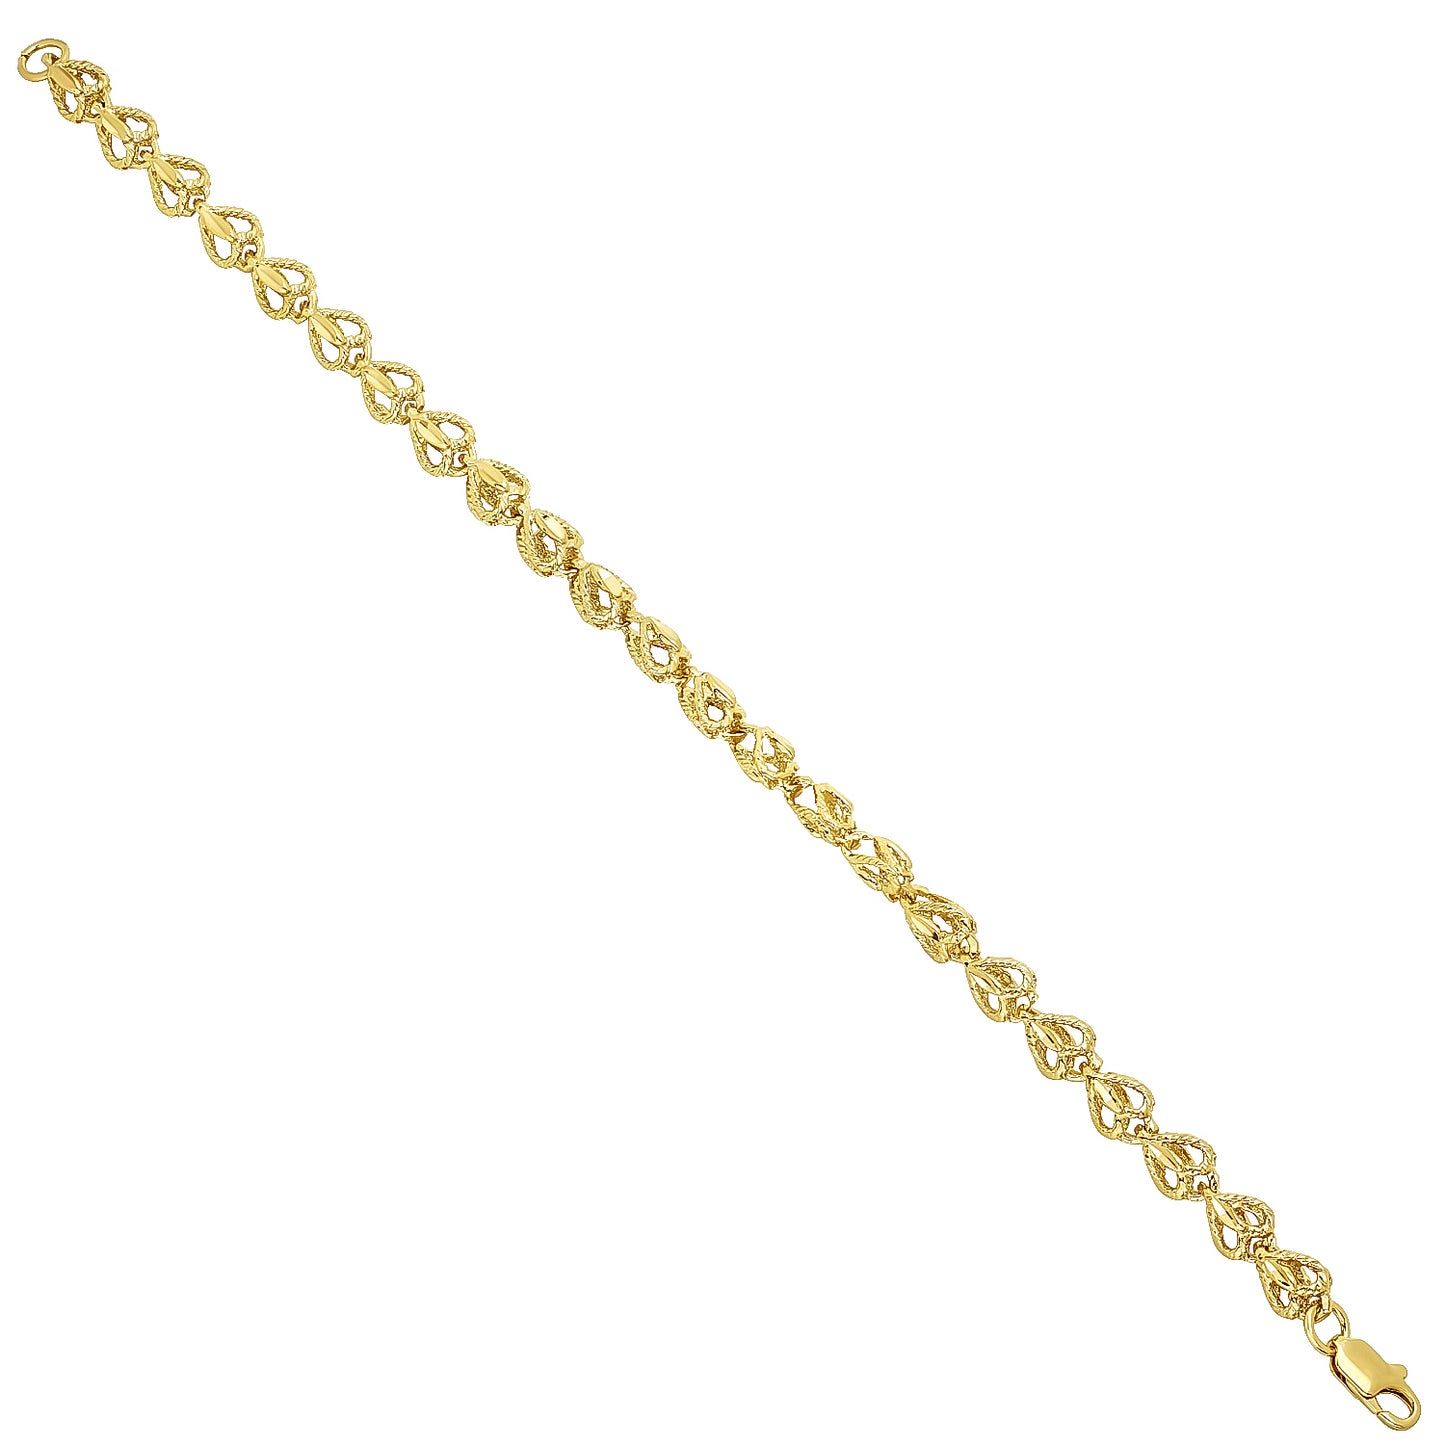 7mm Textured 14k Yellow Gold Plated Heart Link Chain Necklace (SKU: GL-RM12)